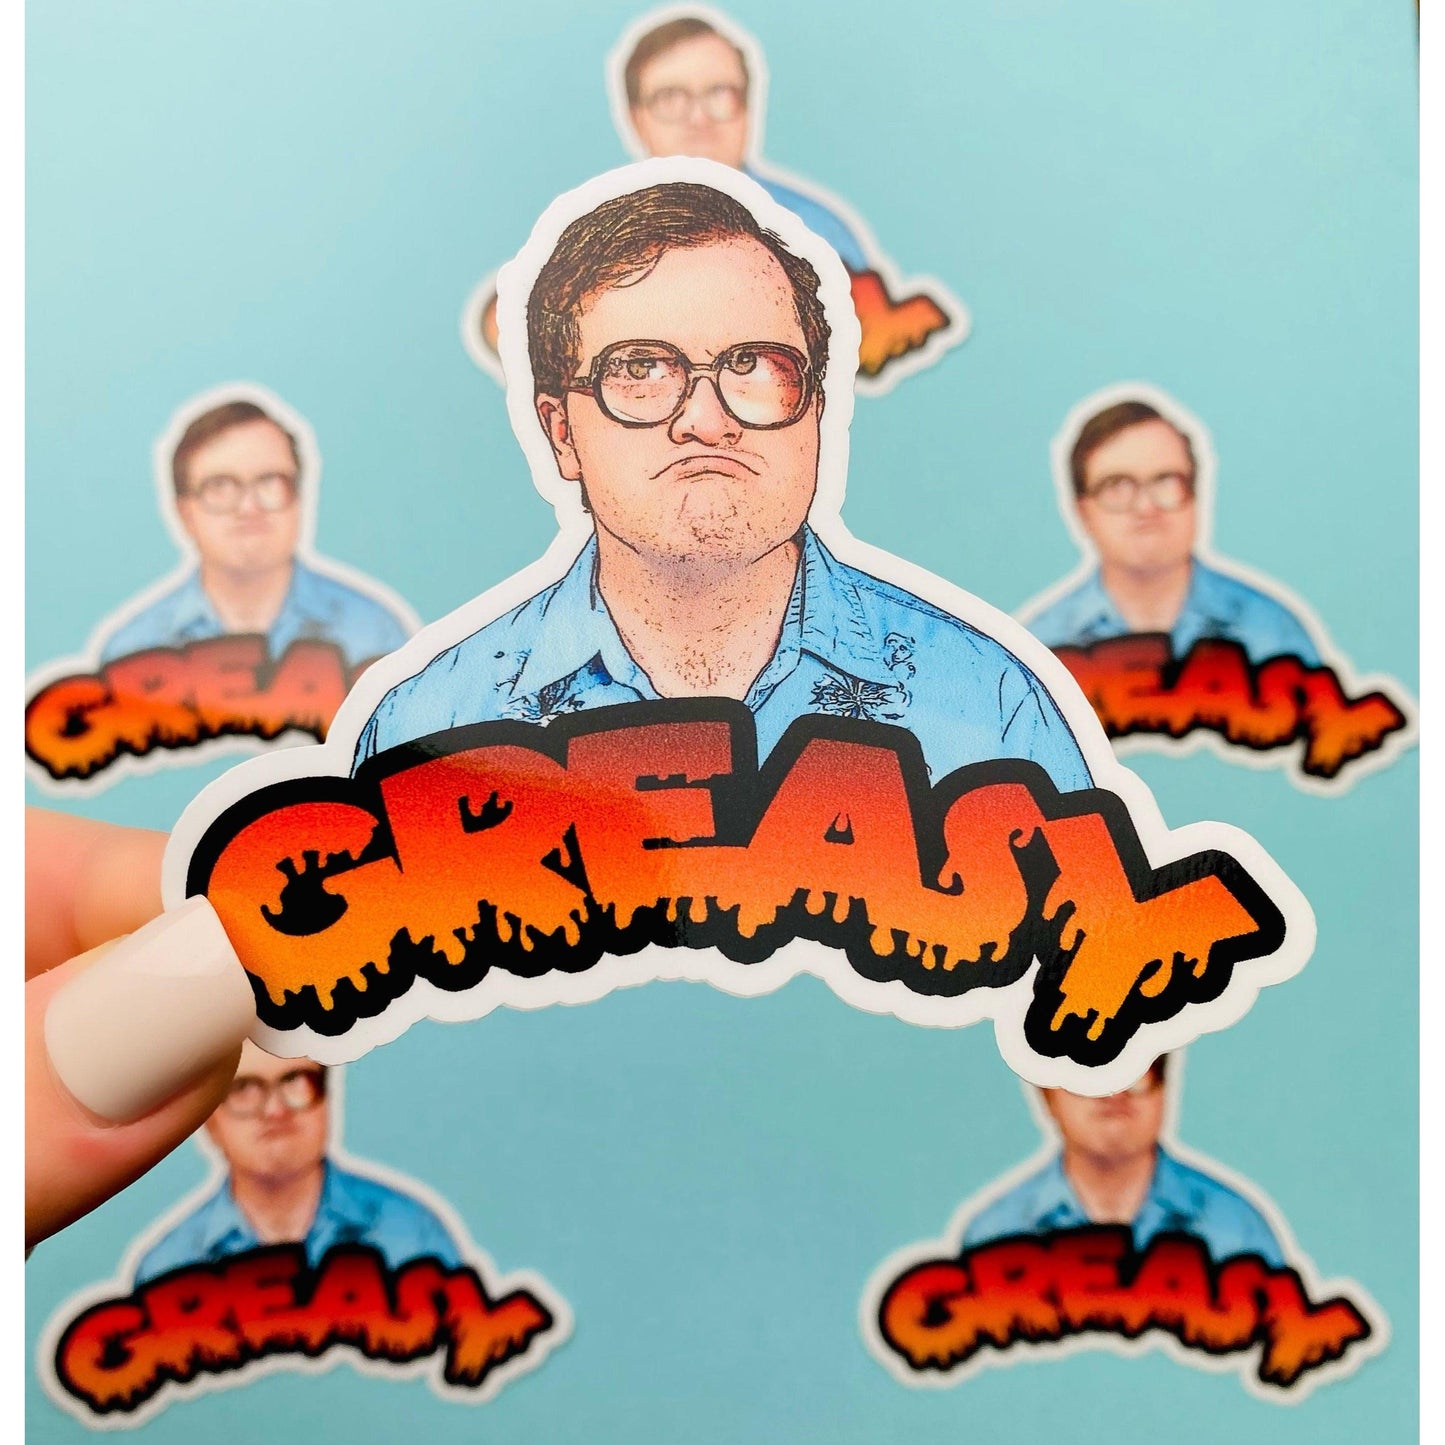 Trailer Park Boys Bubbles Sticker | Officially Licensed Bubbles That's A Nice Kitty Sticker | Trailer Park Boys Bubbles Quotes with Glasses - Ottos Grotto :: Stickers For Your Stuff